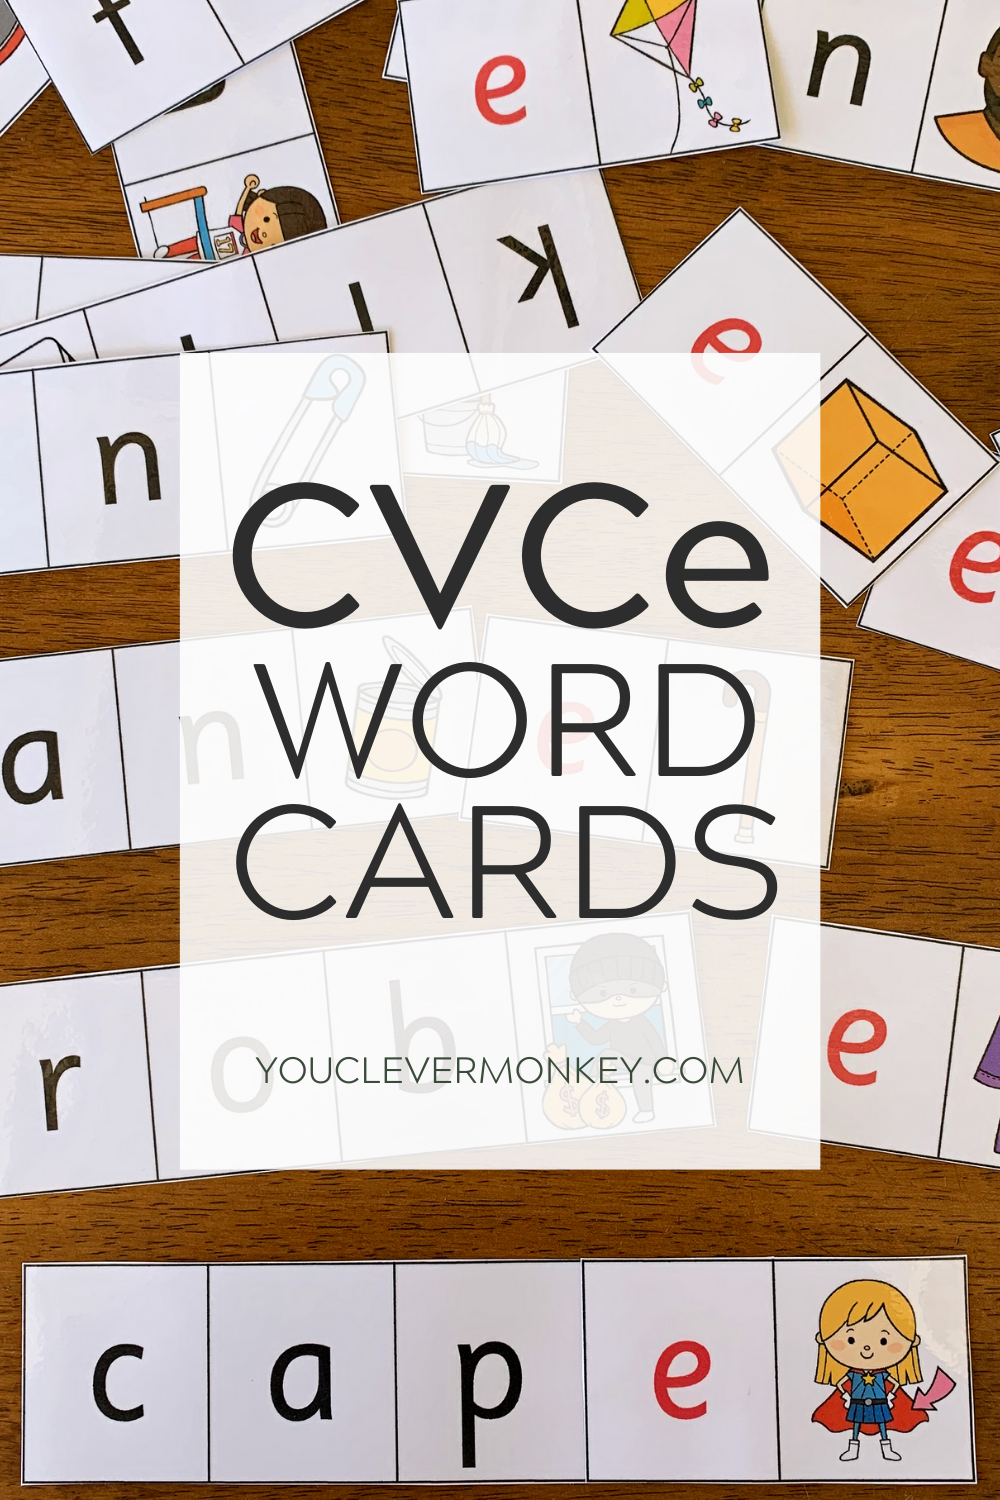 CVC to CVCe Word Cards - Learning the different vowel sounds can be challenging for many young learners. These CVC to CVCe Word cards provide helpful visual support for children struggling with the change in vowel sounds from short to long to create CVCe words from CVC words. Answer cards and recording sheets have been included to allow children to work independently | you clever monkey